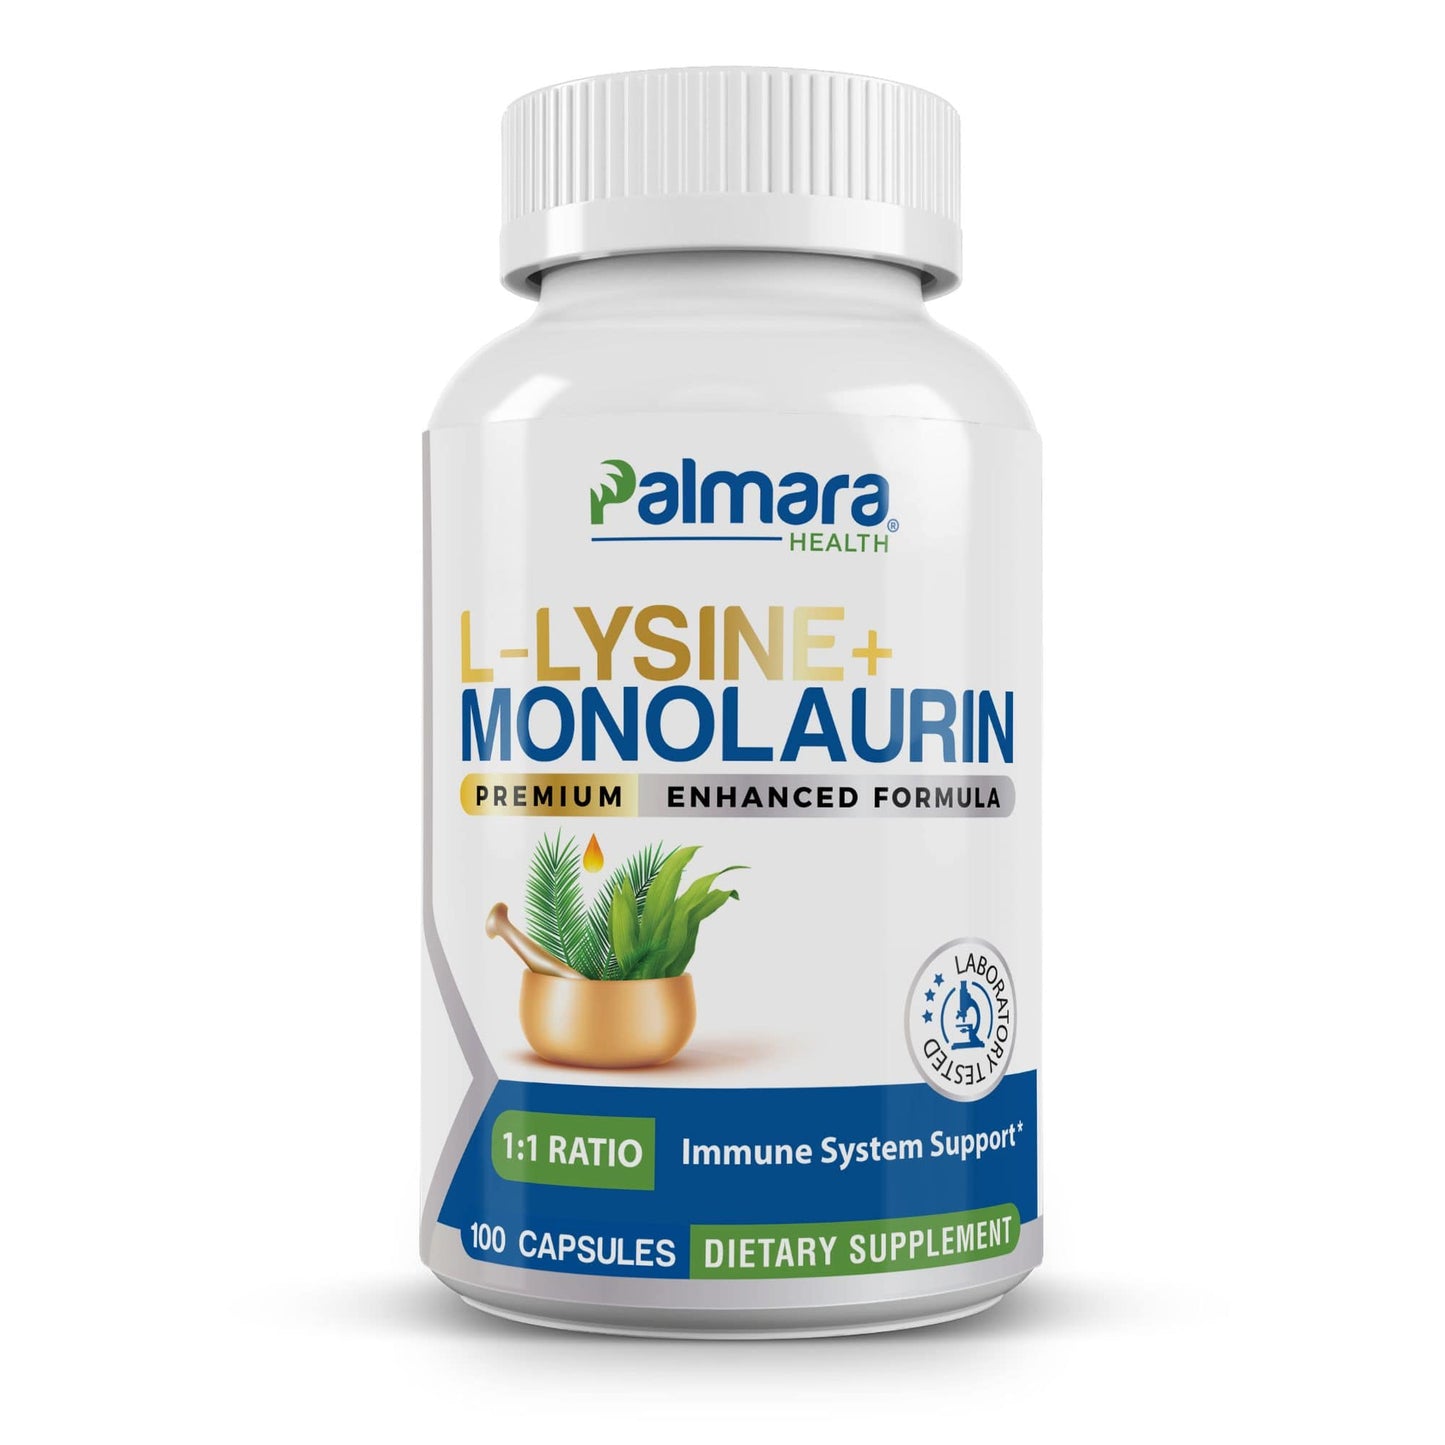 A bottle of Palmara Health L-Lysine + Monolaurin dietary supplement, indicating a 1:1 ratio blend for immune system support, with 100 capsules per bottle.